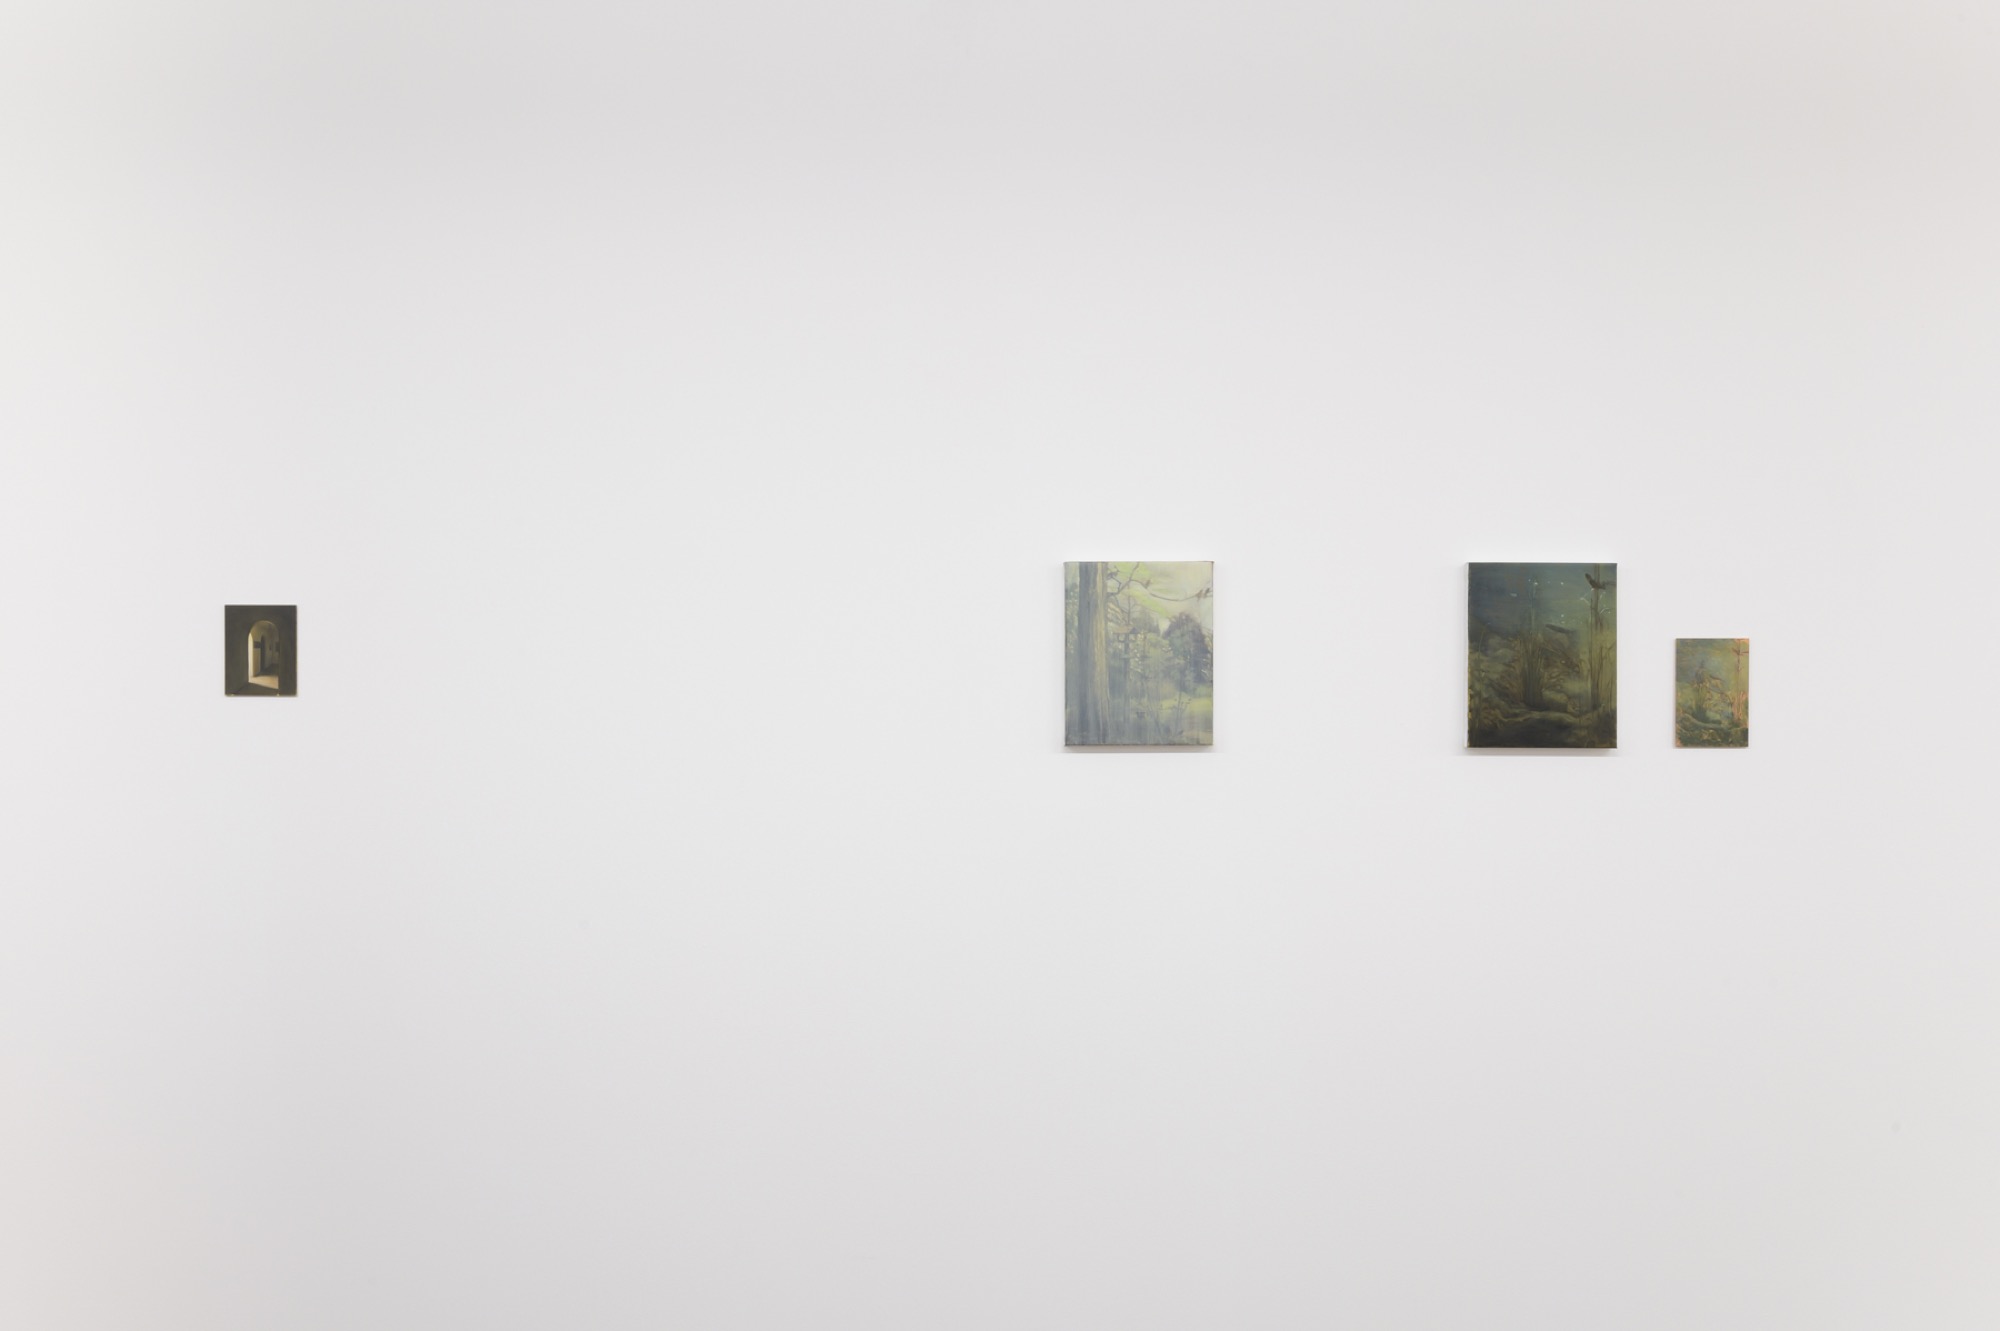 Kate Wallace, L-R, <em>View to a room #2</em>, 2019, oil on board, 12.7 x 10.3cm, <em>Views of trees and birds #1</em>, 2019, oil on linen, 25 x 20cm, <em>The outside in #1</em>, 2019, oil on linen, 25 x 20cm, <em>The outside in #2</em>, 2019, oil on copper, 15 x 10cm, photo: Aaron Christopher Rees